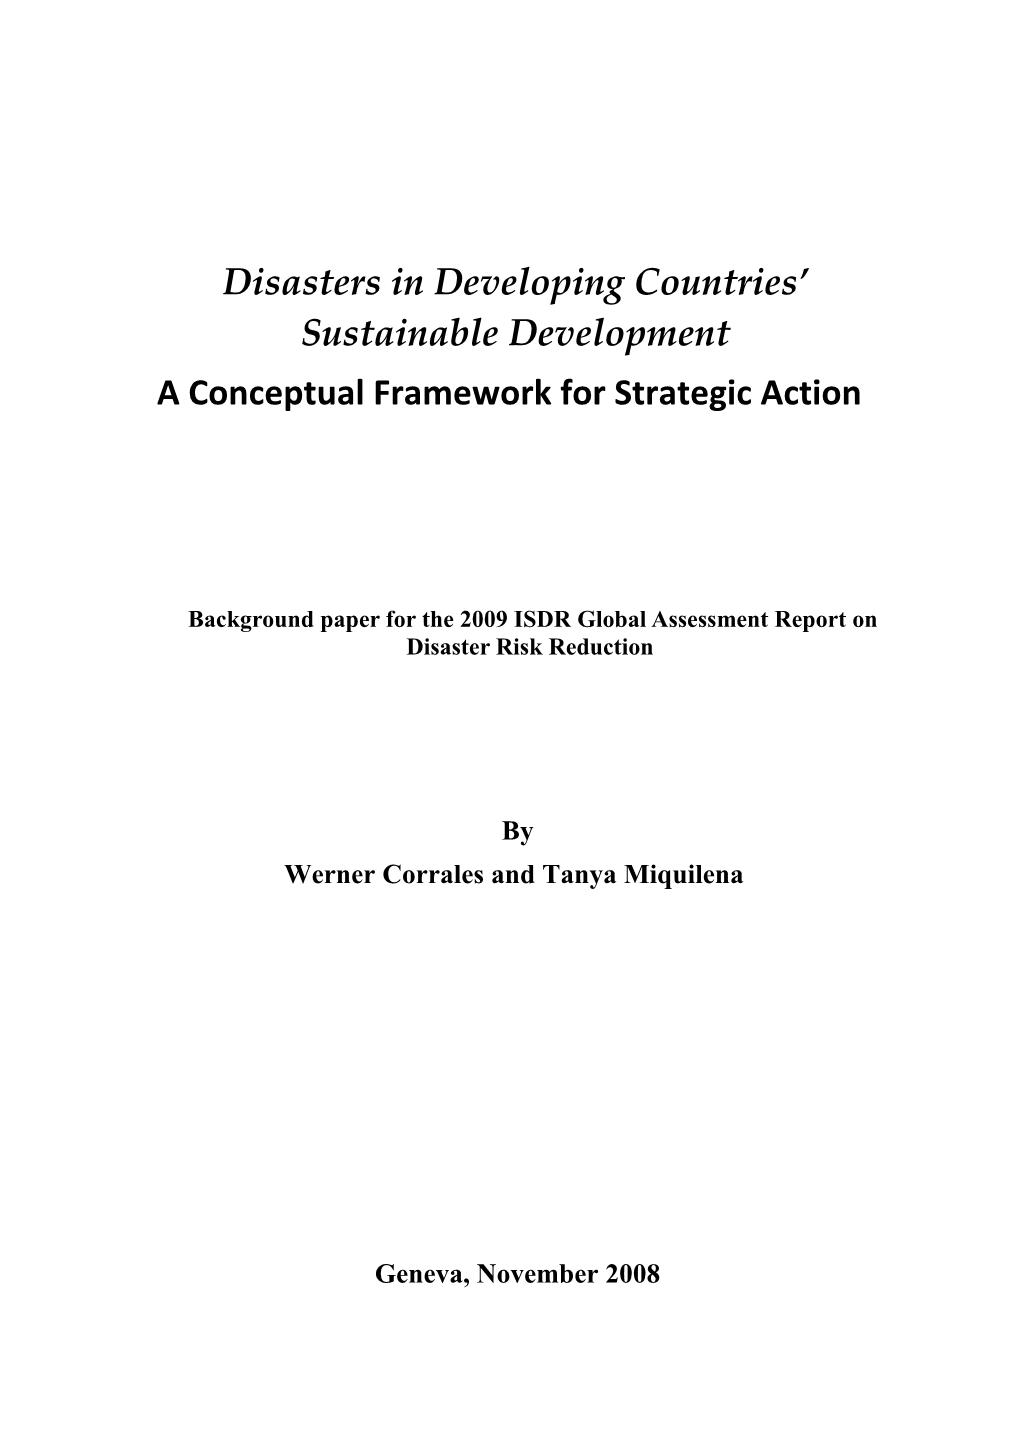 Disasters and Developing Countries Sustainable Development